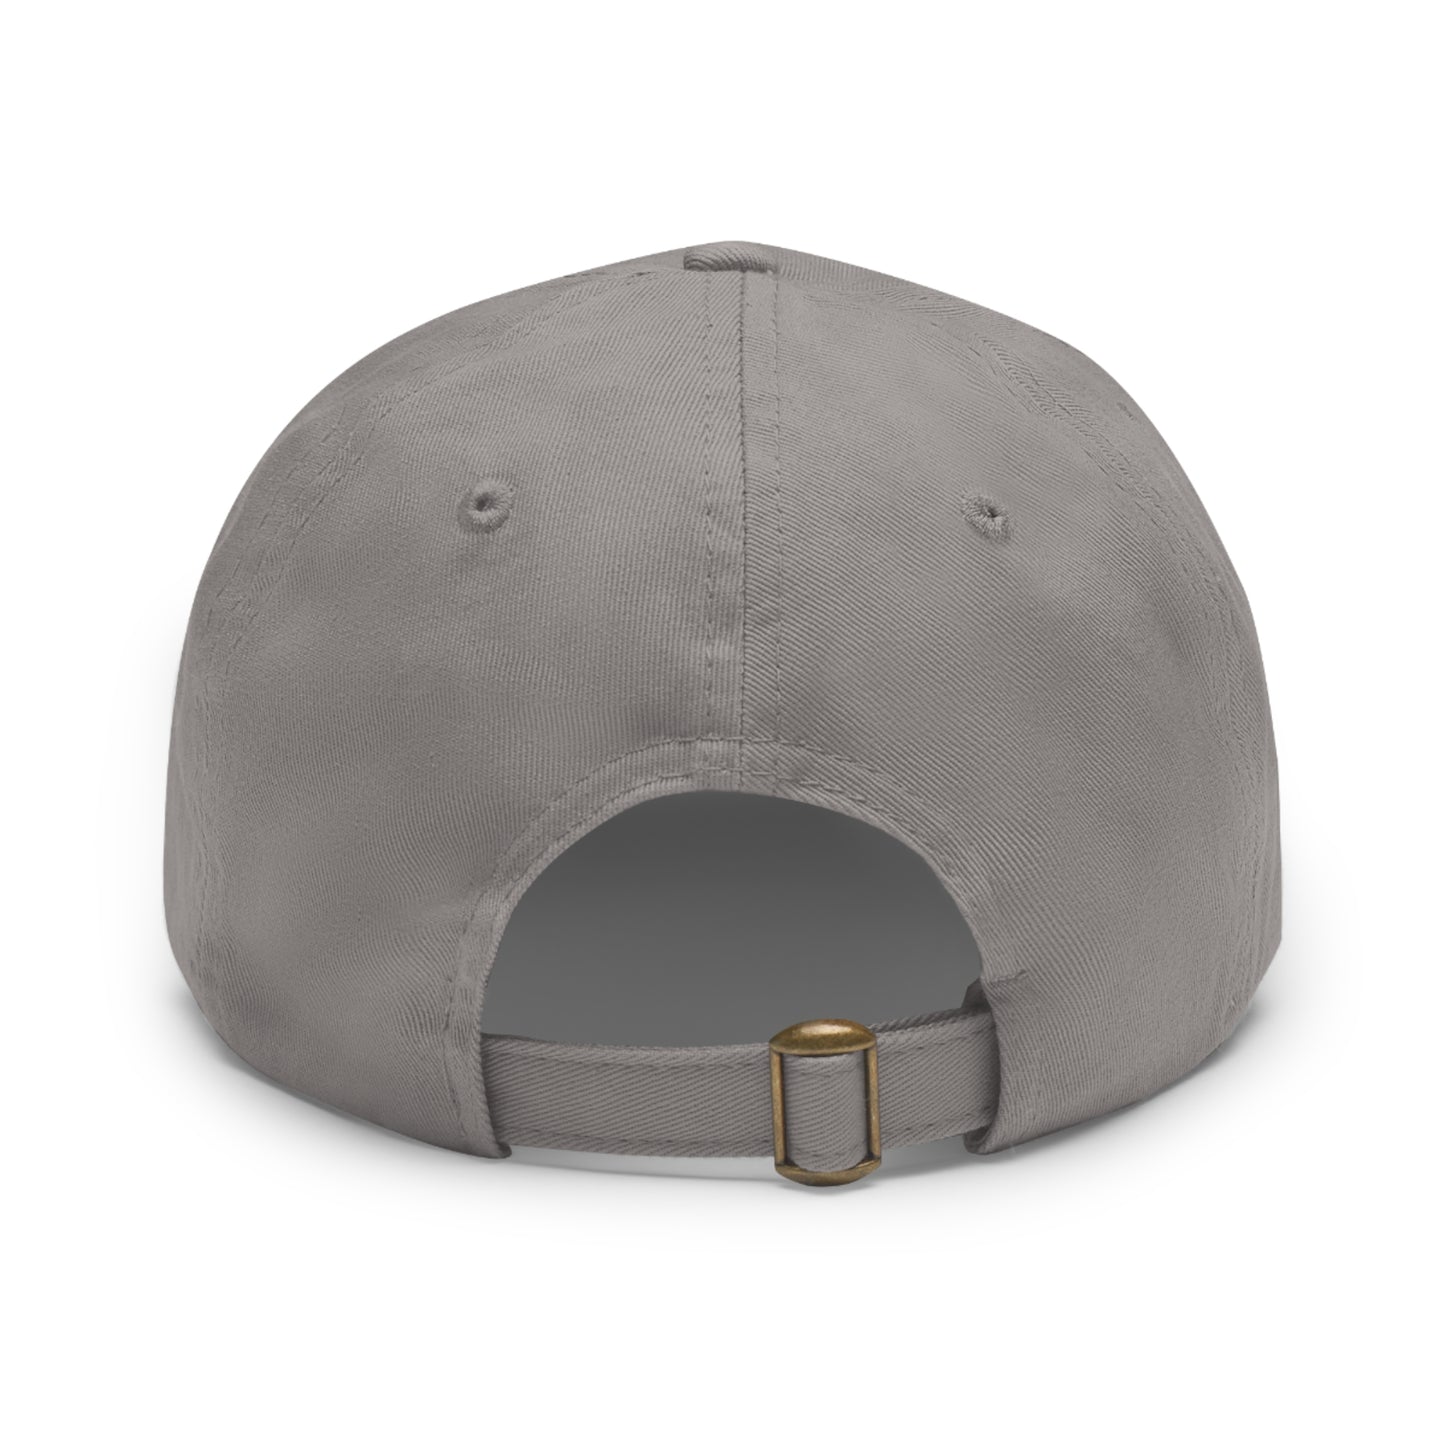 Gatherwood Adventures Dad Hat with Leather Patch (Round)